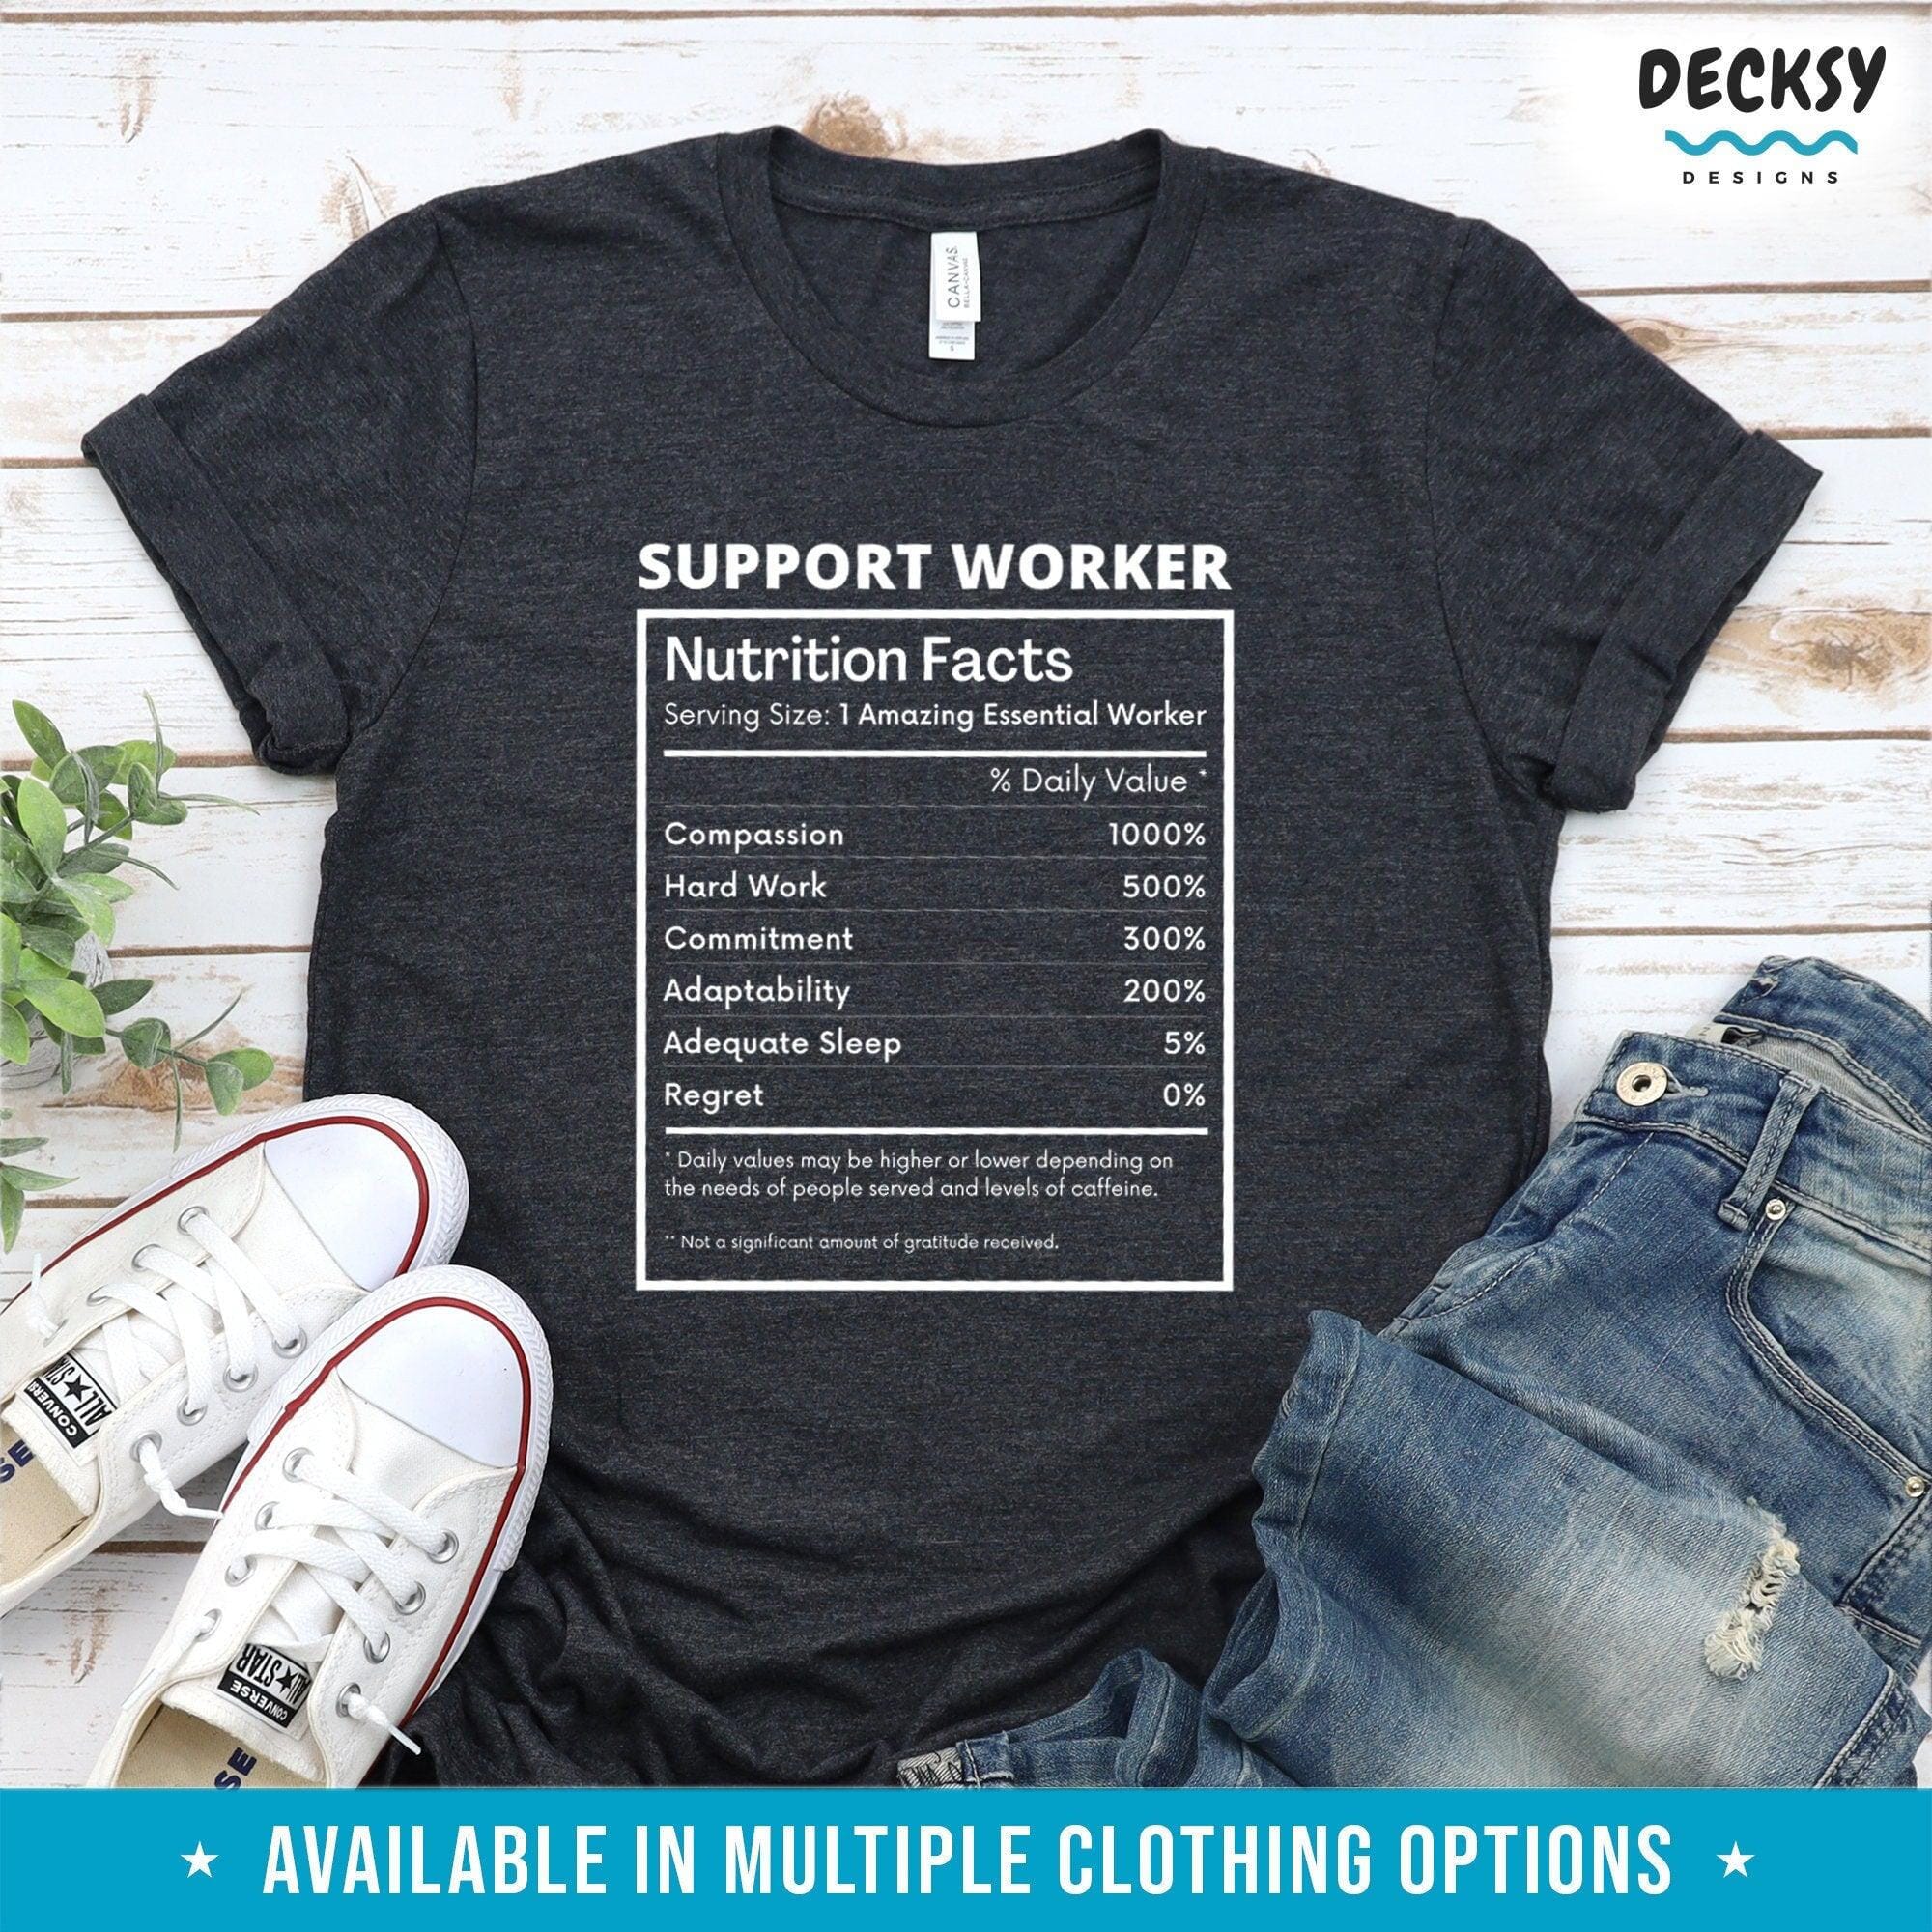 Support Worker Shirt, Social Worker Thank You Gift-Clothing:Gender-Neutral Adult Clothing:Tops & Tees:T-shirts:Graphic Tees-DecksyDesigns